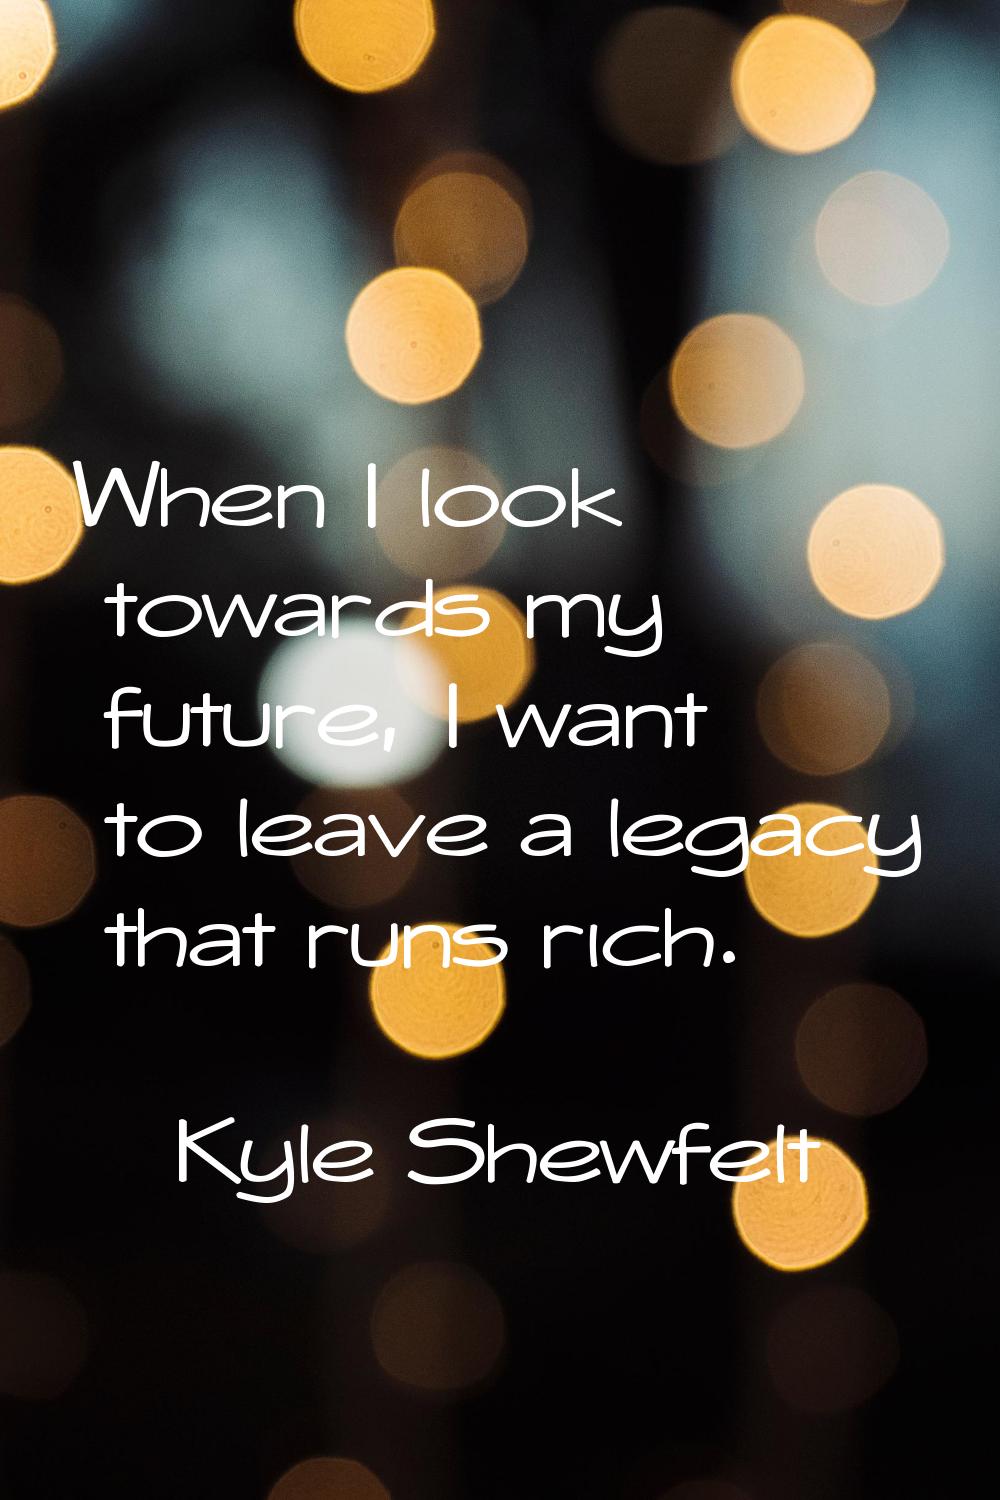 When I look towards my future, I want to leave a legacy that runs rich.